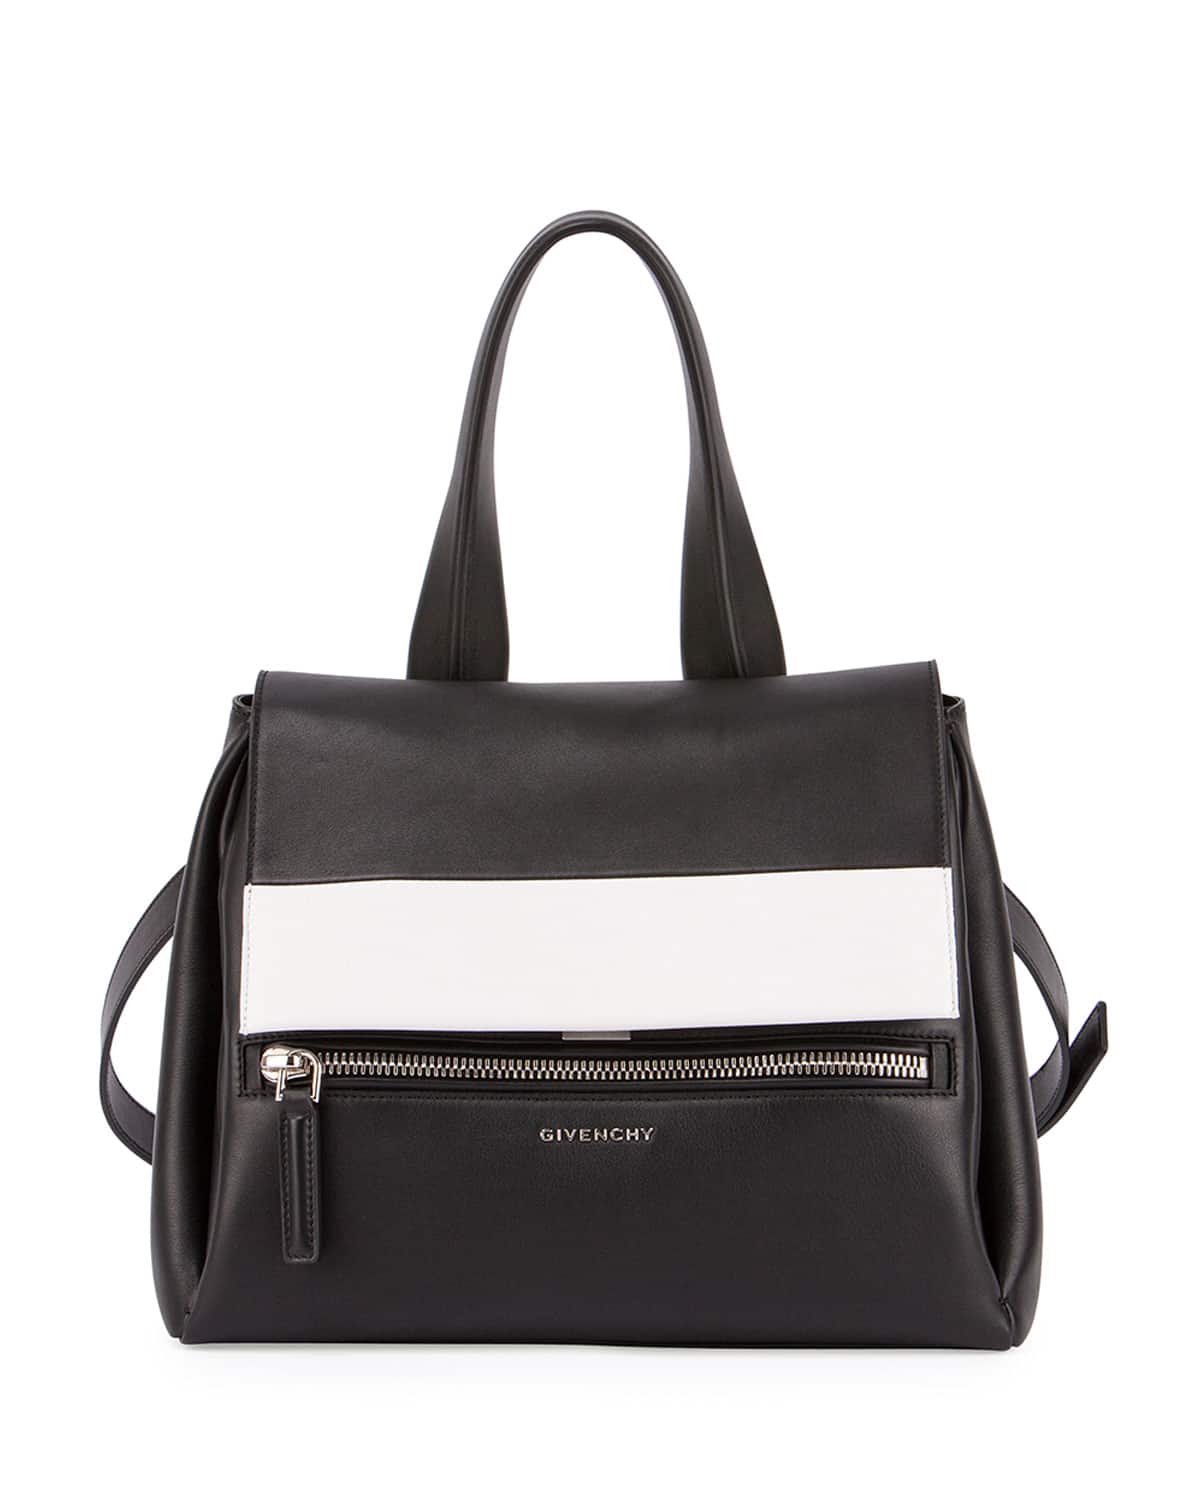 Givenchy Fall/Winter 2015 Bag Collection Featuring Bi-Color Bags ...